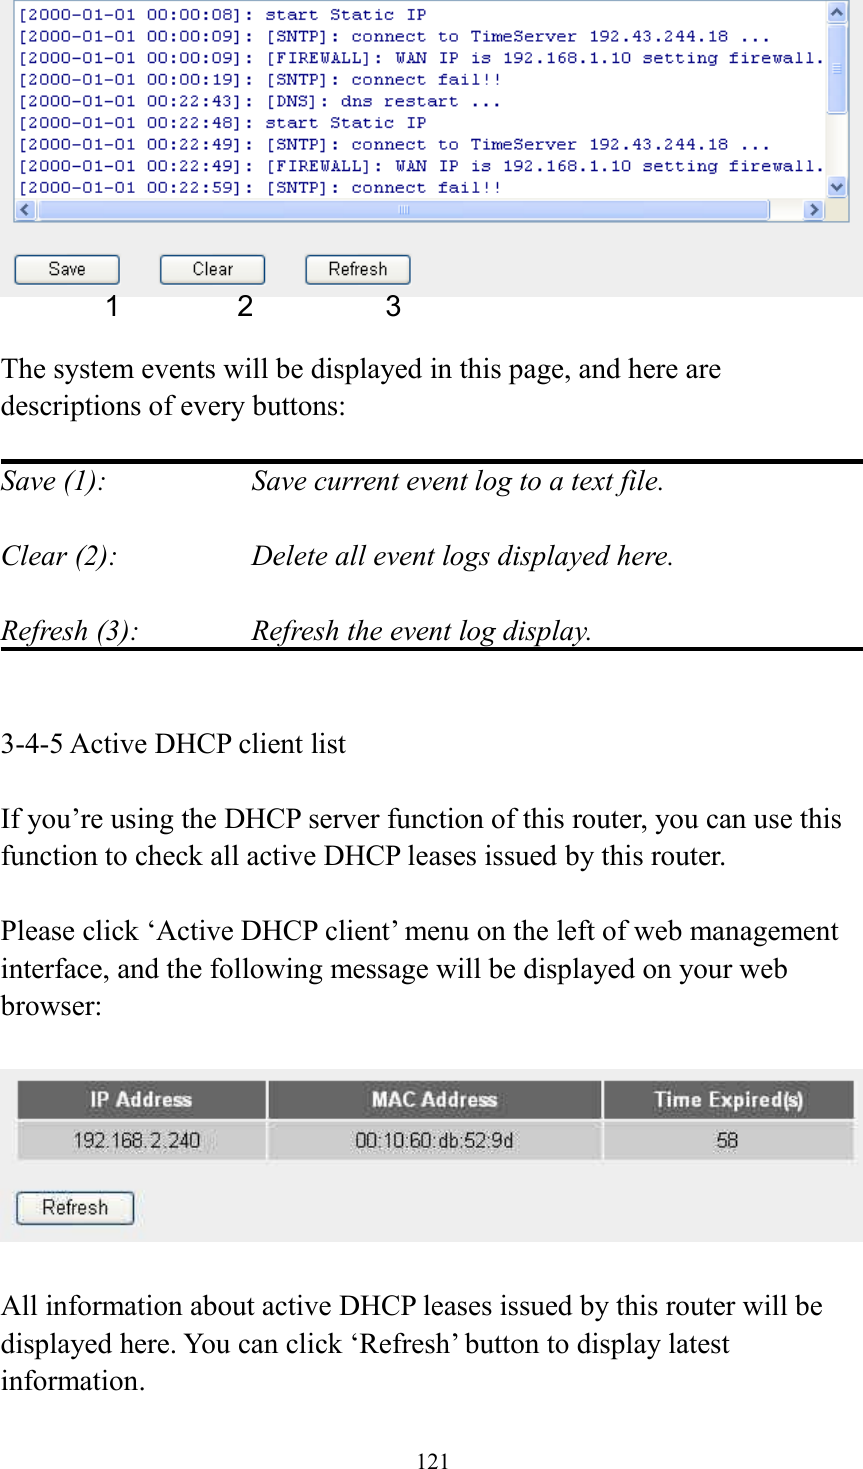 121   The system events will be displayed in this page, and here are descriptions of every buttons:  Save (1):        Save current event log to a text file.  Clear (2):        Delete all event logs displayed here.  Refresh (3):      Refresh the event log display.   3-4-5 Active DHCP client list  If you’re using the DHCP server function of this router, you can use this function to check all active DHCP leases issued by this router.  Please click ‘Active DHCP client’ menu on the left of web management interface, and the following message will be displayed on your web browser:    All information about active DHCP leases issued by this router will be displayed here. You can click ‘Refresh’ button to display latest information. 1 2 3 